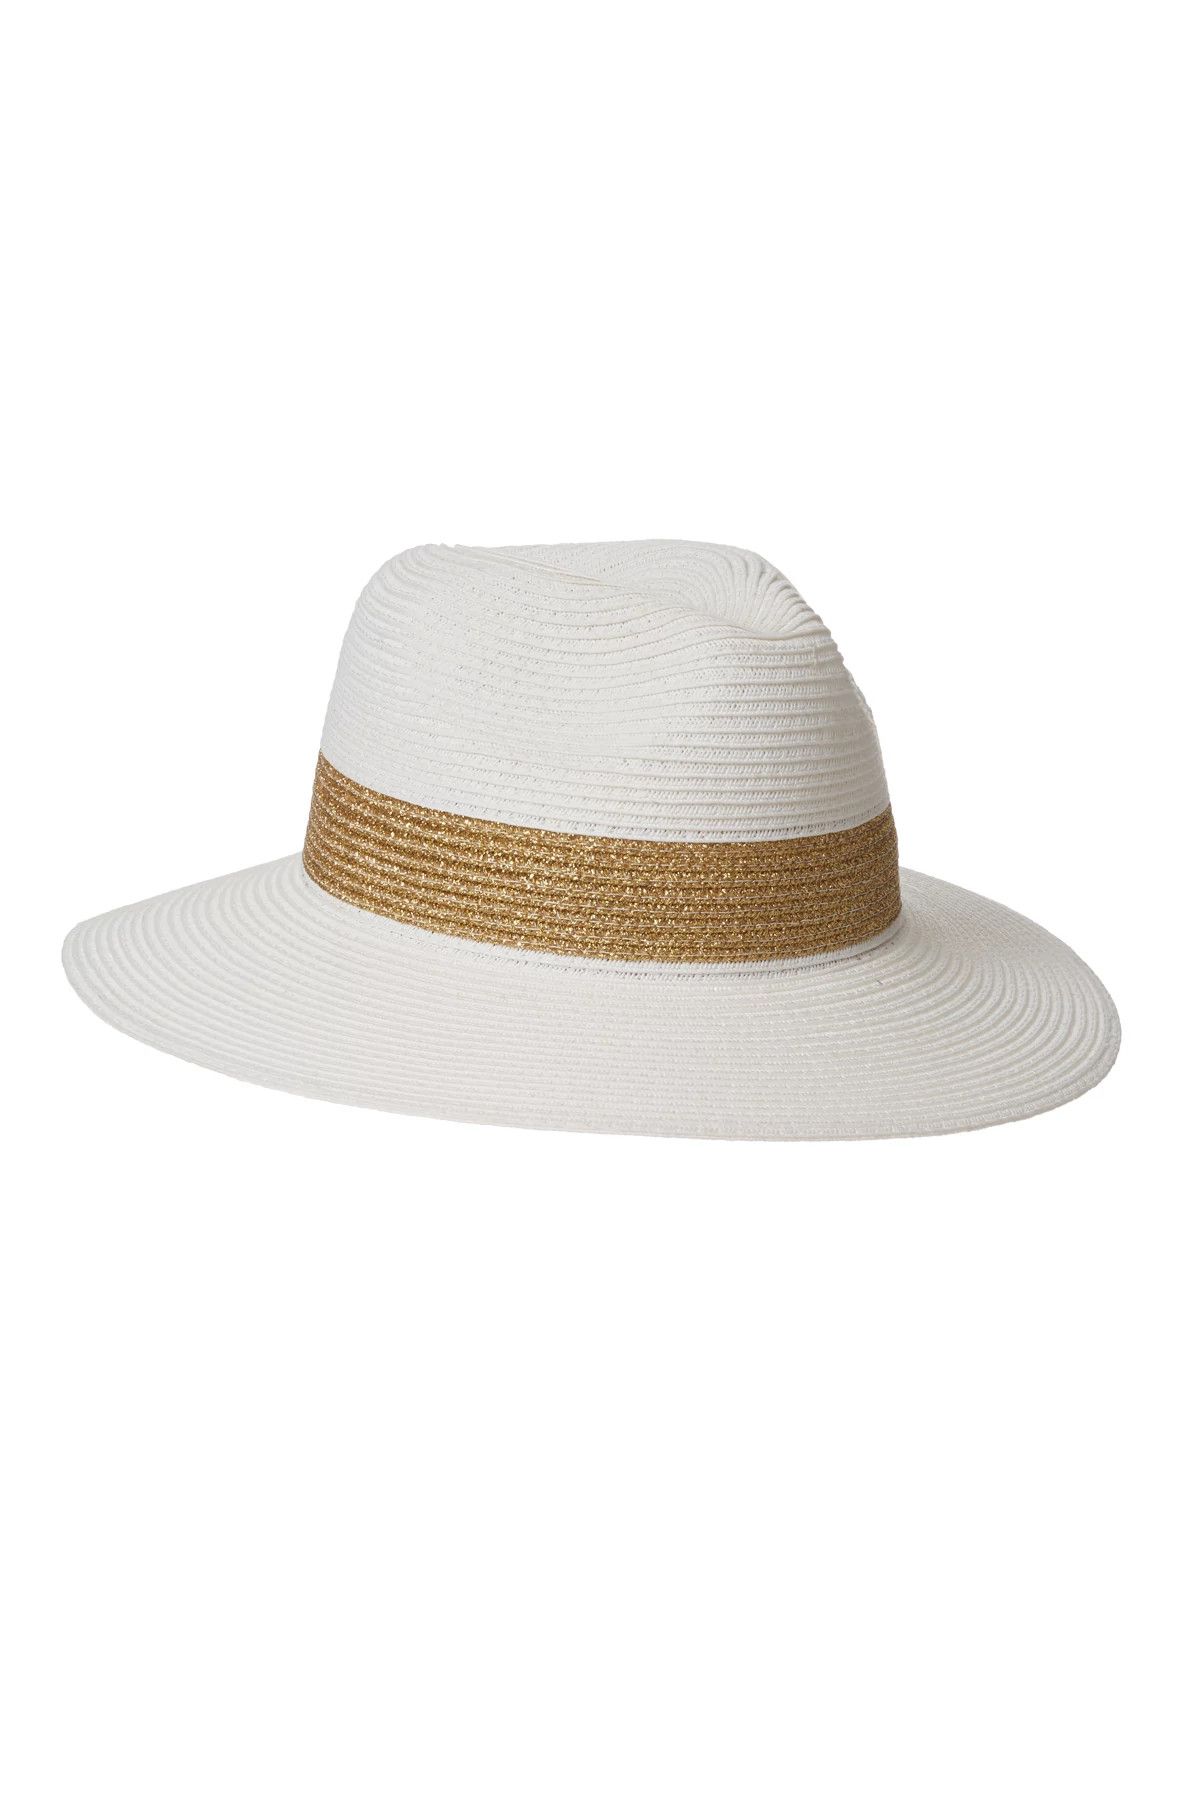 Biscayne Panama Hat | Everything But Water